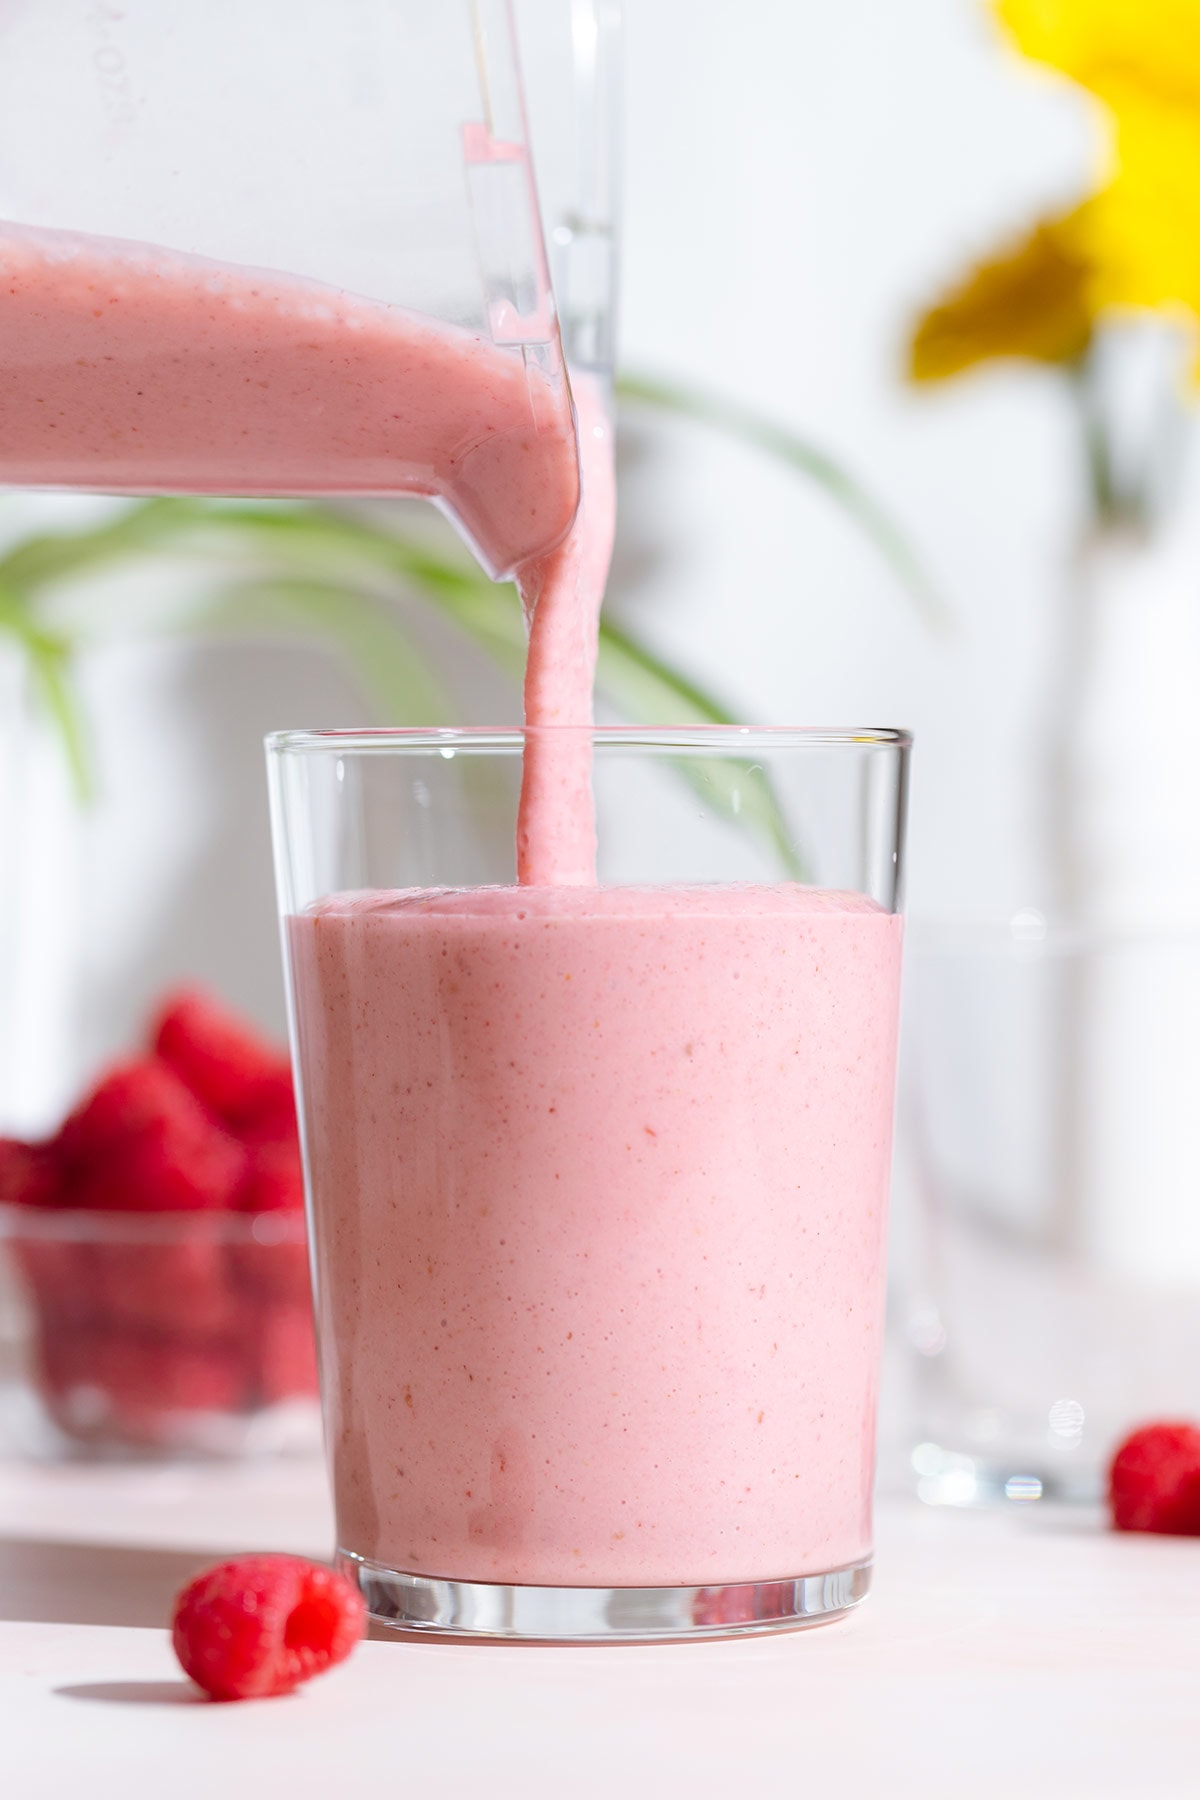 Creamy pink smoothie being poured into a tall glass from a blender with fresh raspberries around the glass.